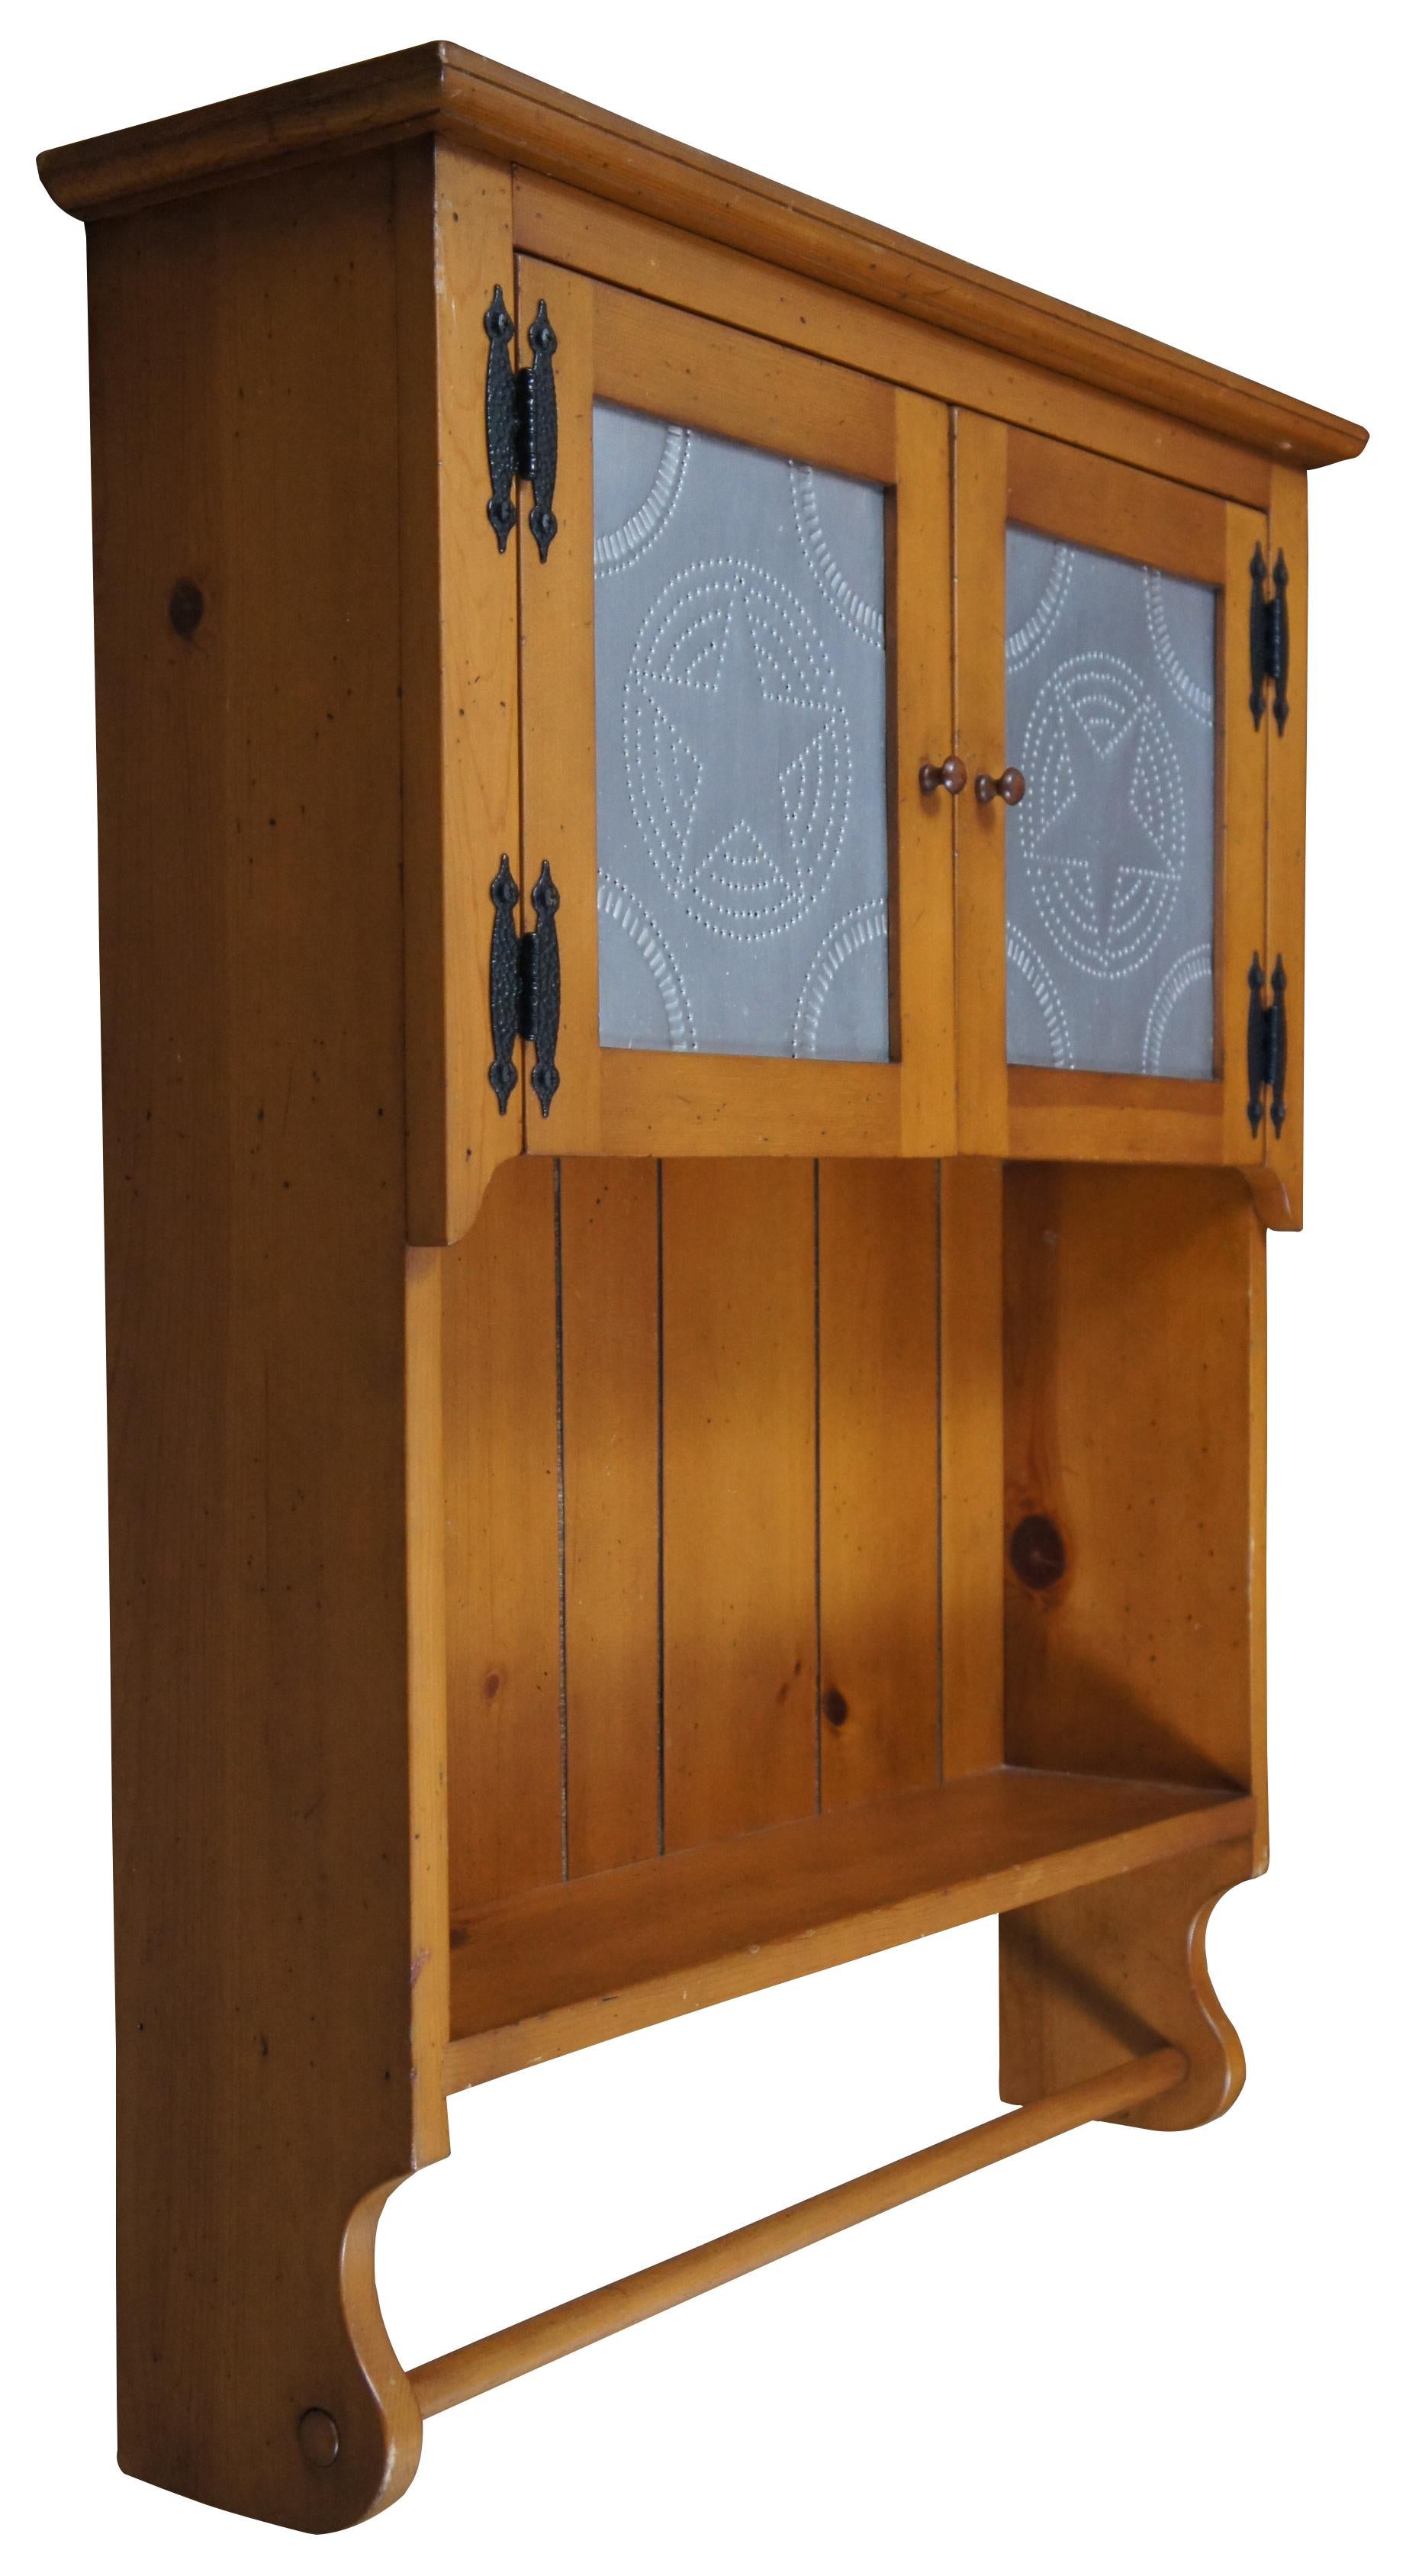 Country style wall hanging cabinet with towel bar and star stamped tin panels on the doors.
  